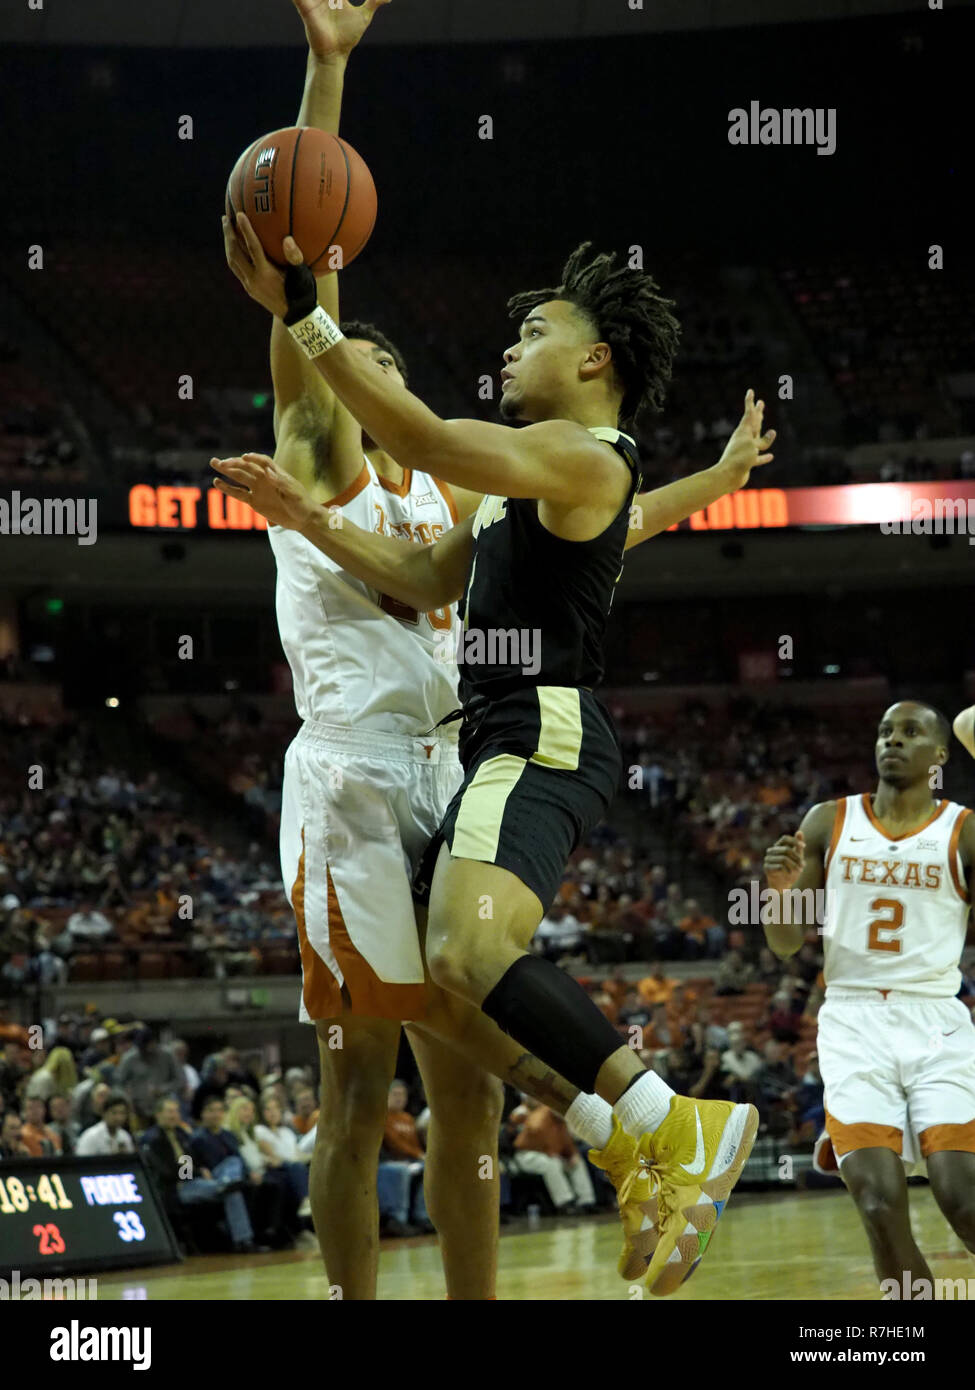 Austin, Texas, USA. 9th Dec 2018. Carsen Edwards #3 of the Purdue Boilermakers in action vs the Texas Longhorns at the Frank Erwin Center in Austin Texas. Texas defeats Purdue 72-68.Robert Backman/Cal Sport Media. Credit: Cal Sport Media/Alamy Live News Stock Photo